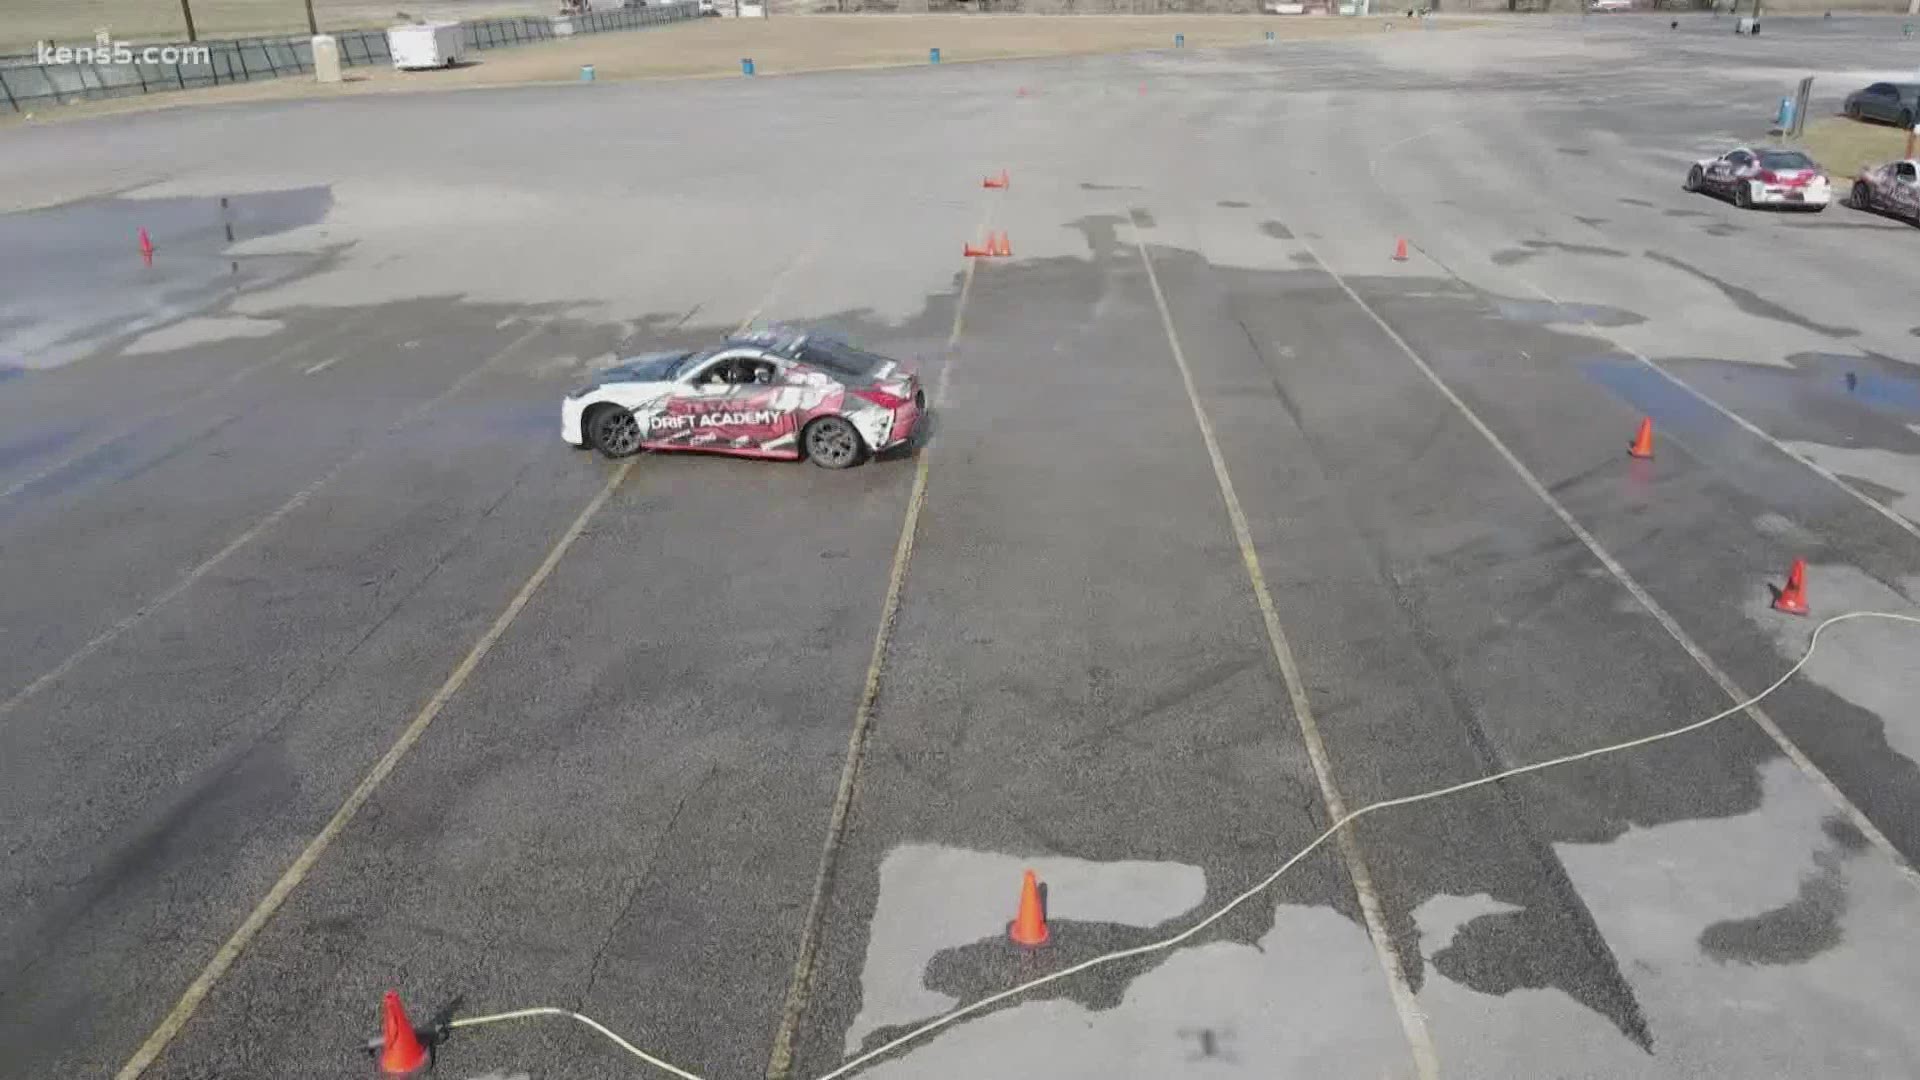 In this week's Texas Outdoors, we're going drifting with KENS 5's Barry Davis and the Texas Drift Academy.